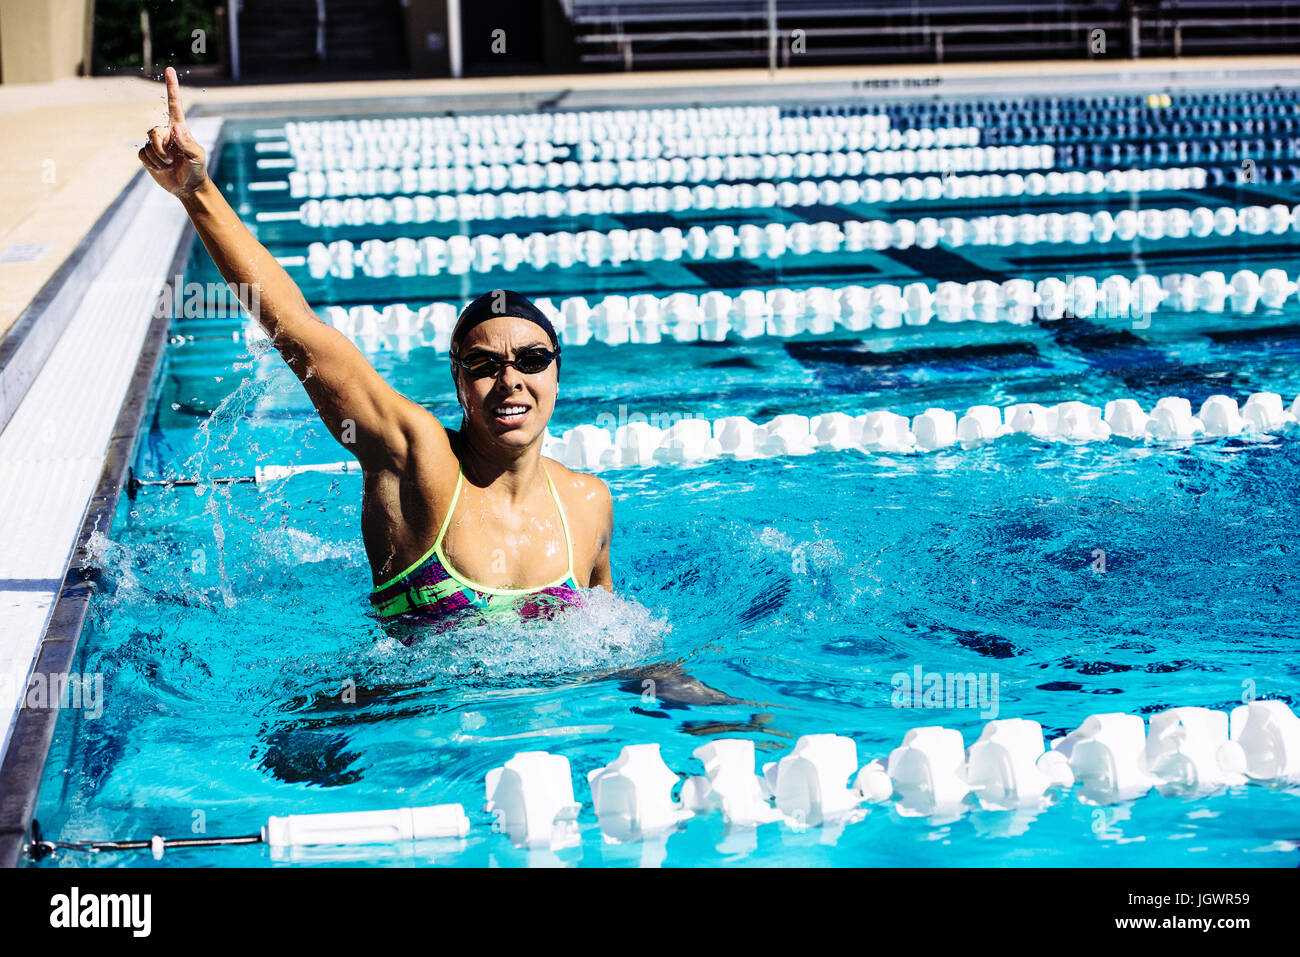 Swimmer in water in pool gesturing triumph Stock Photo